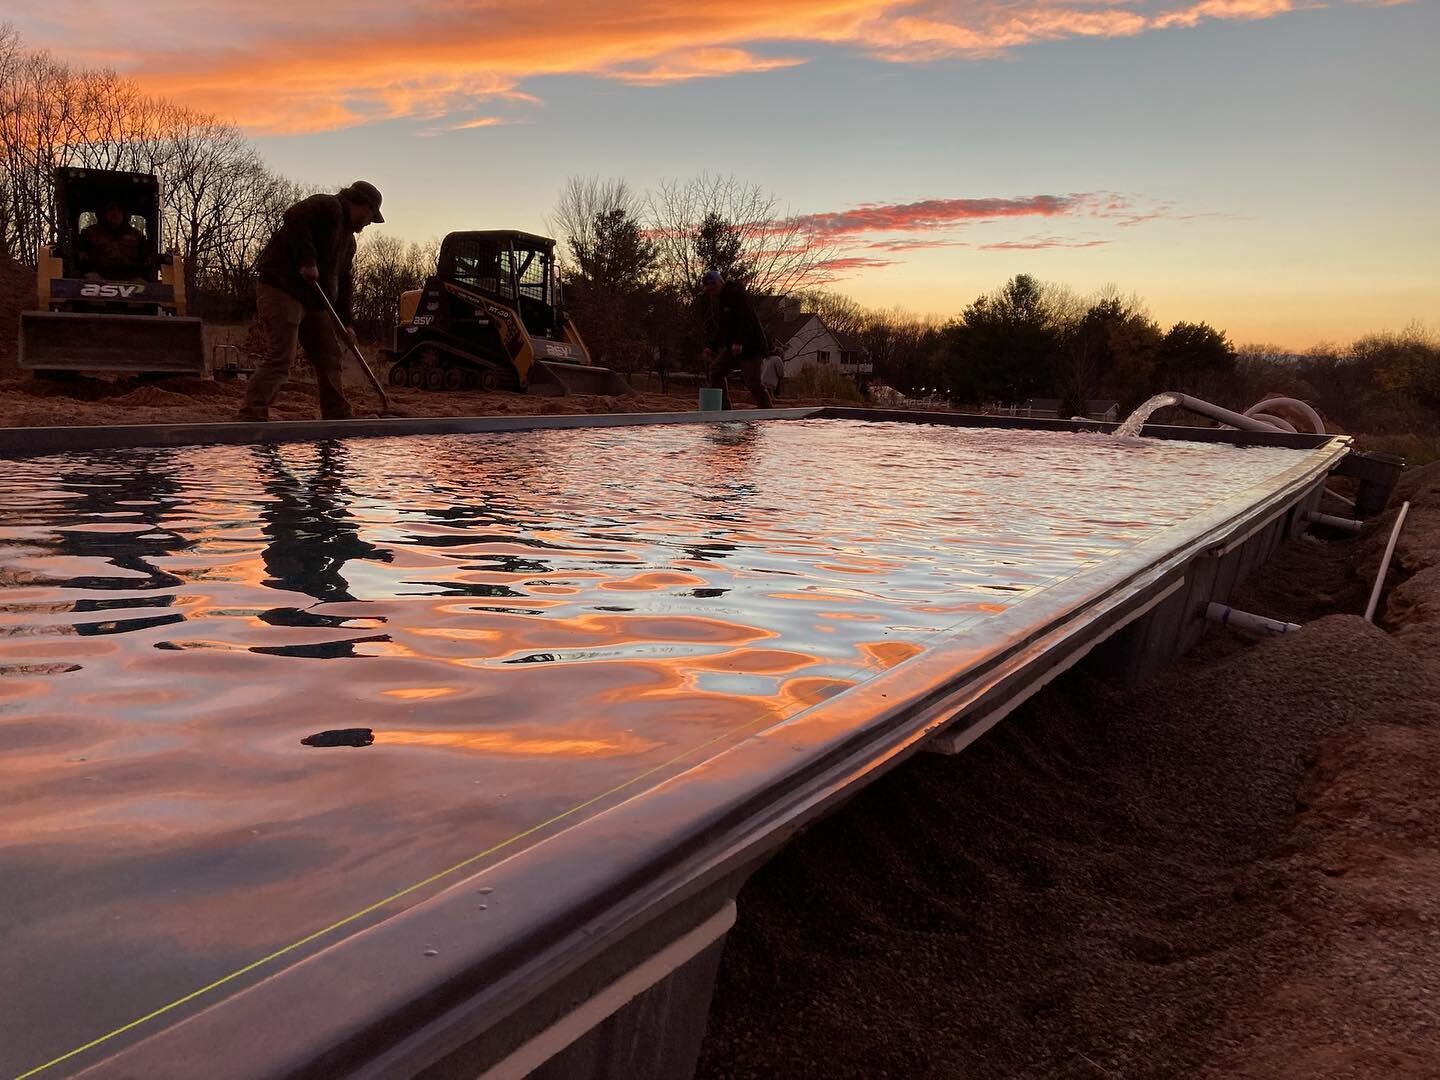 Had to take a minute to appreciate this view from the job site tonight. First sunset at the new pool. ✨

#poolinstallation #landscapedesign #imaginepools #outdoorliving